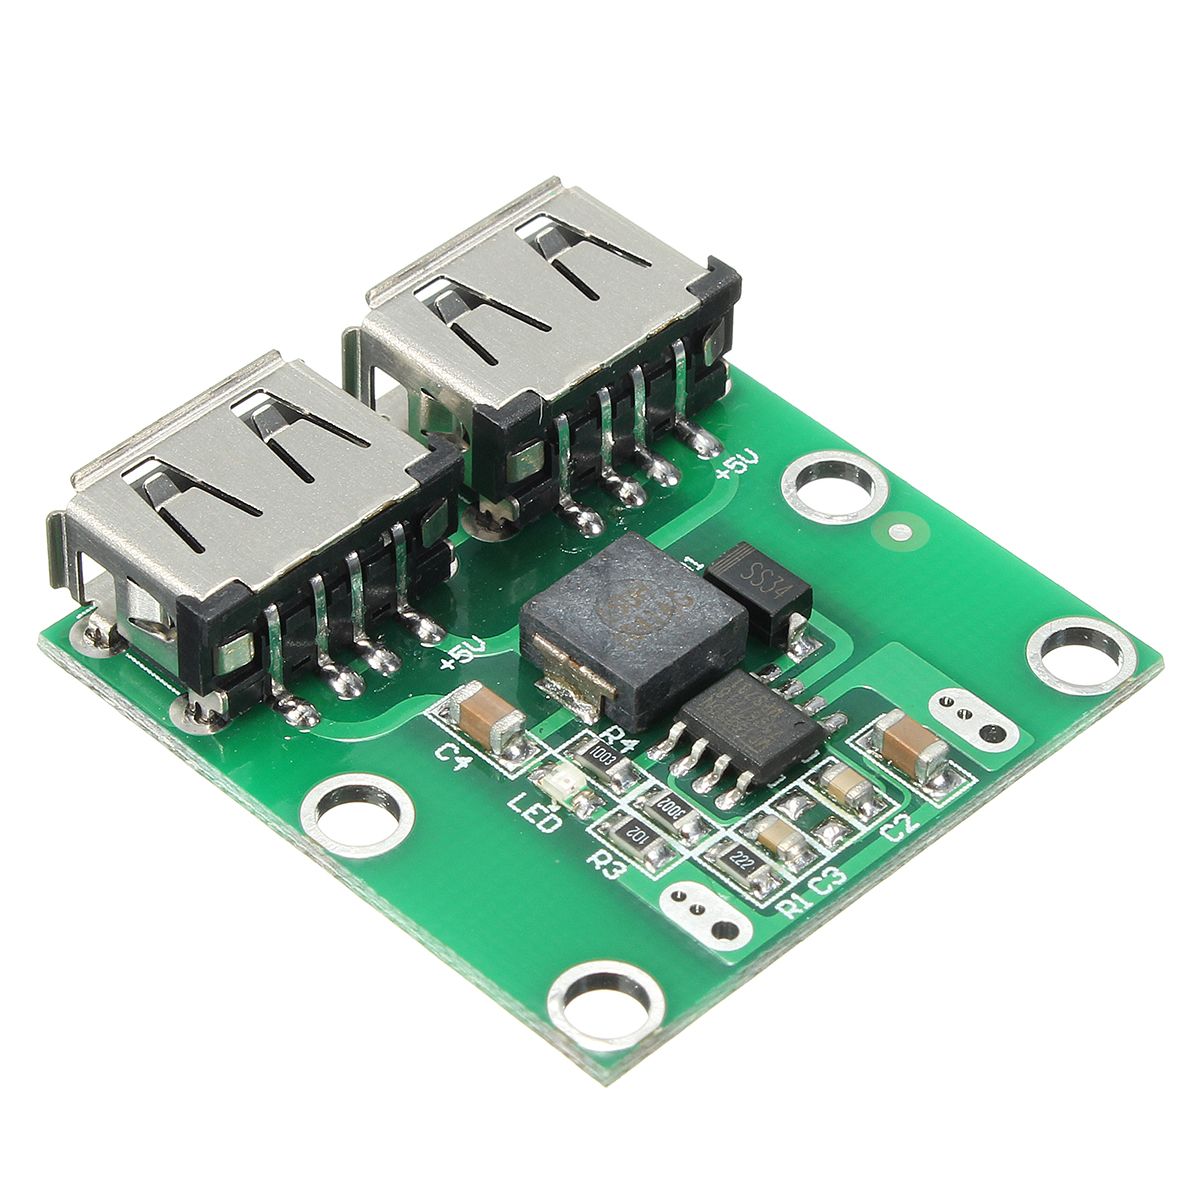 5Pcs-Dual-USB-Output-6-24V-To-52V-3A-DC-DC-Step-Down-Power-Charger-Module-Converter-1123514